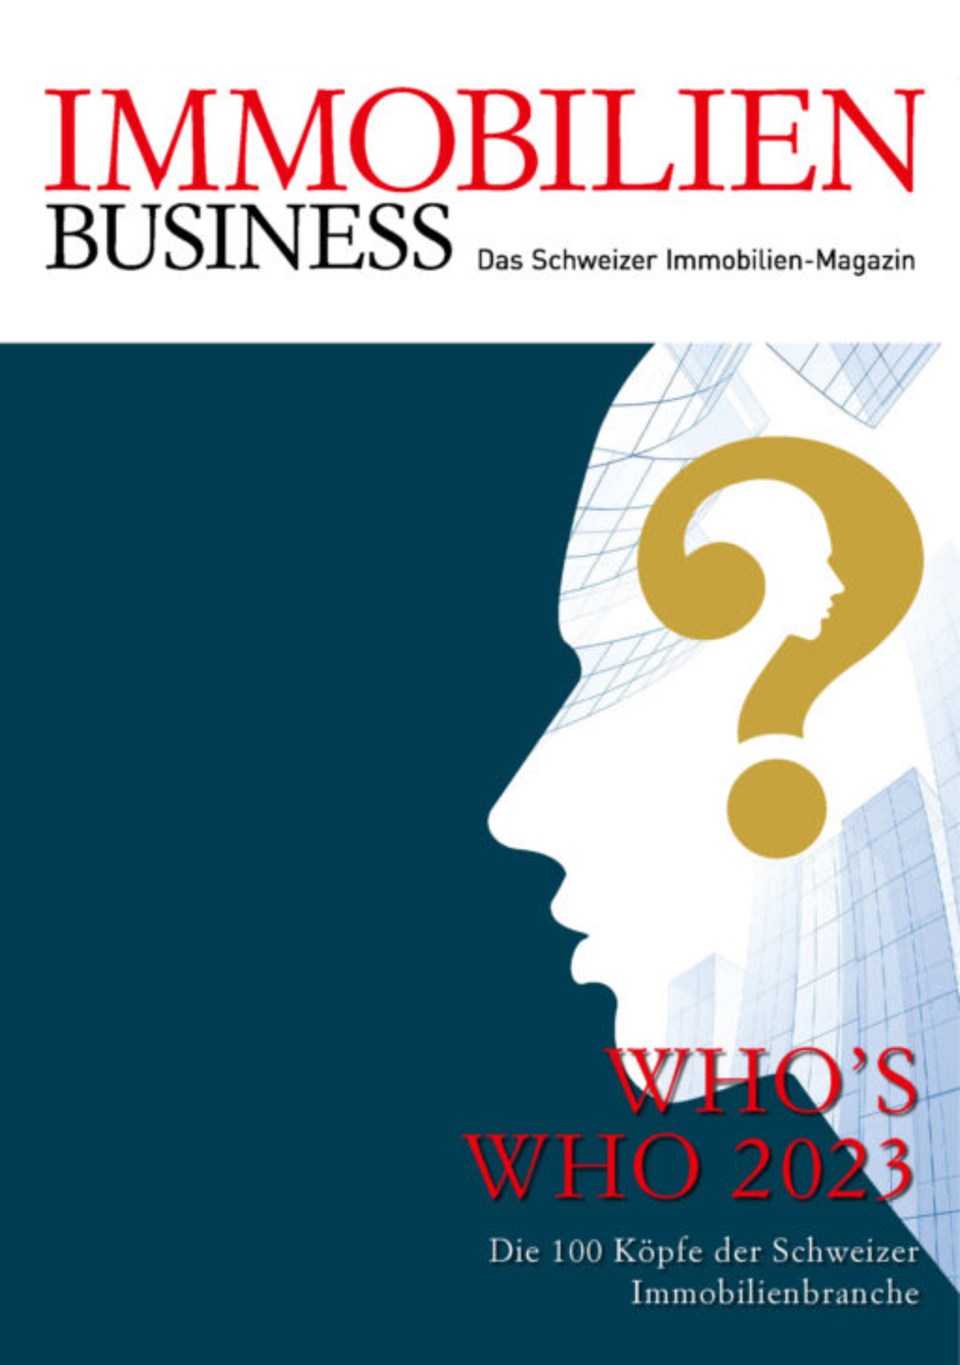 Who is Who der Immobilienbranche